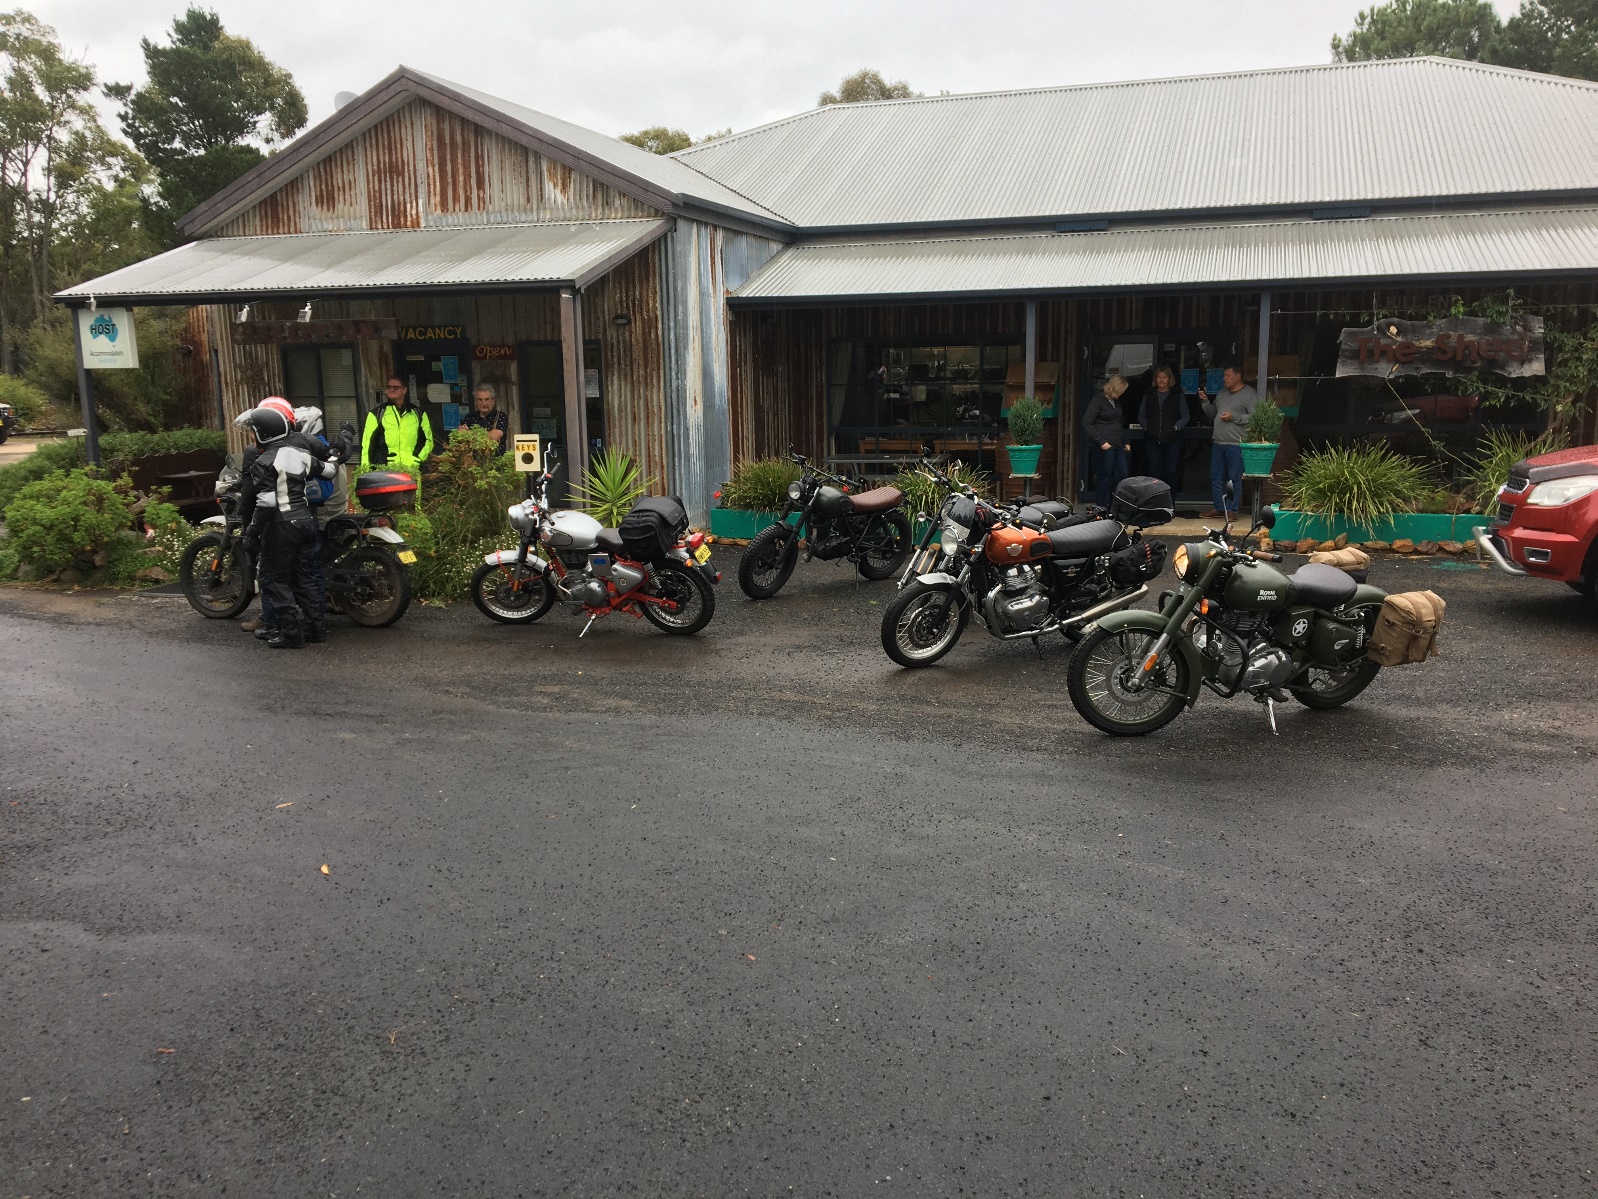 Motorcycles parked in front of a store

Description automatically generated with medium confidence